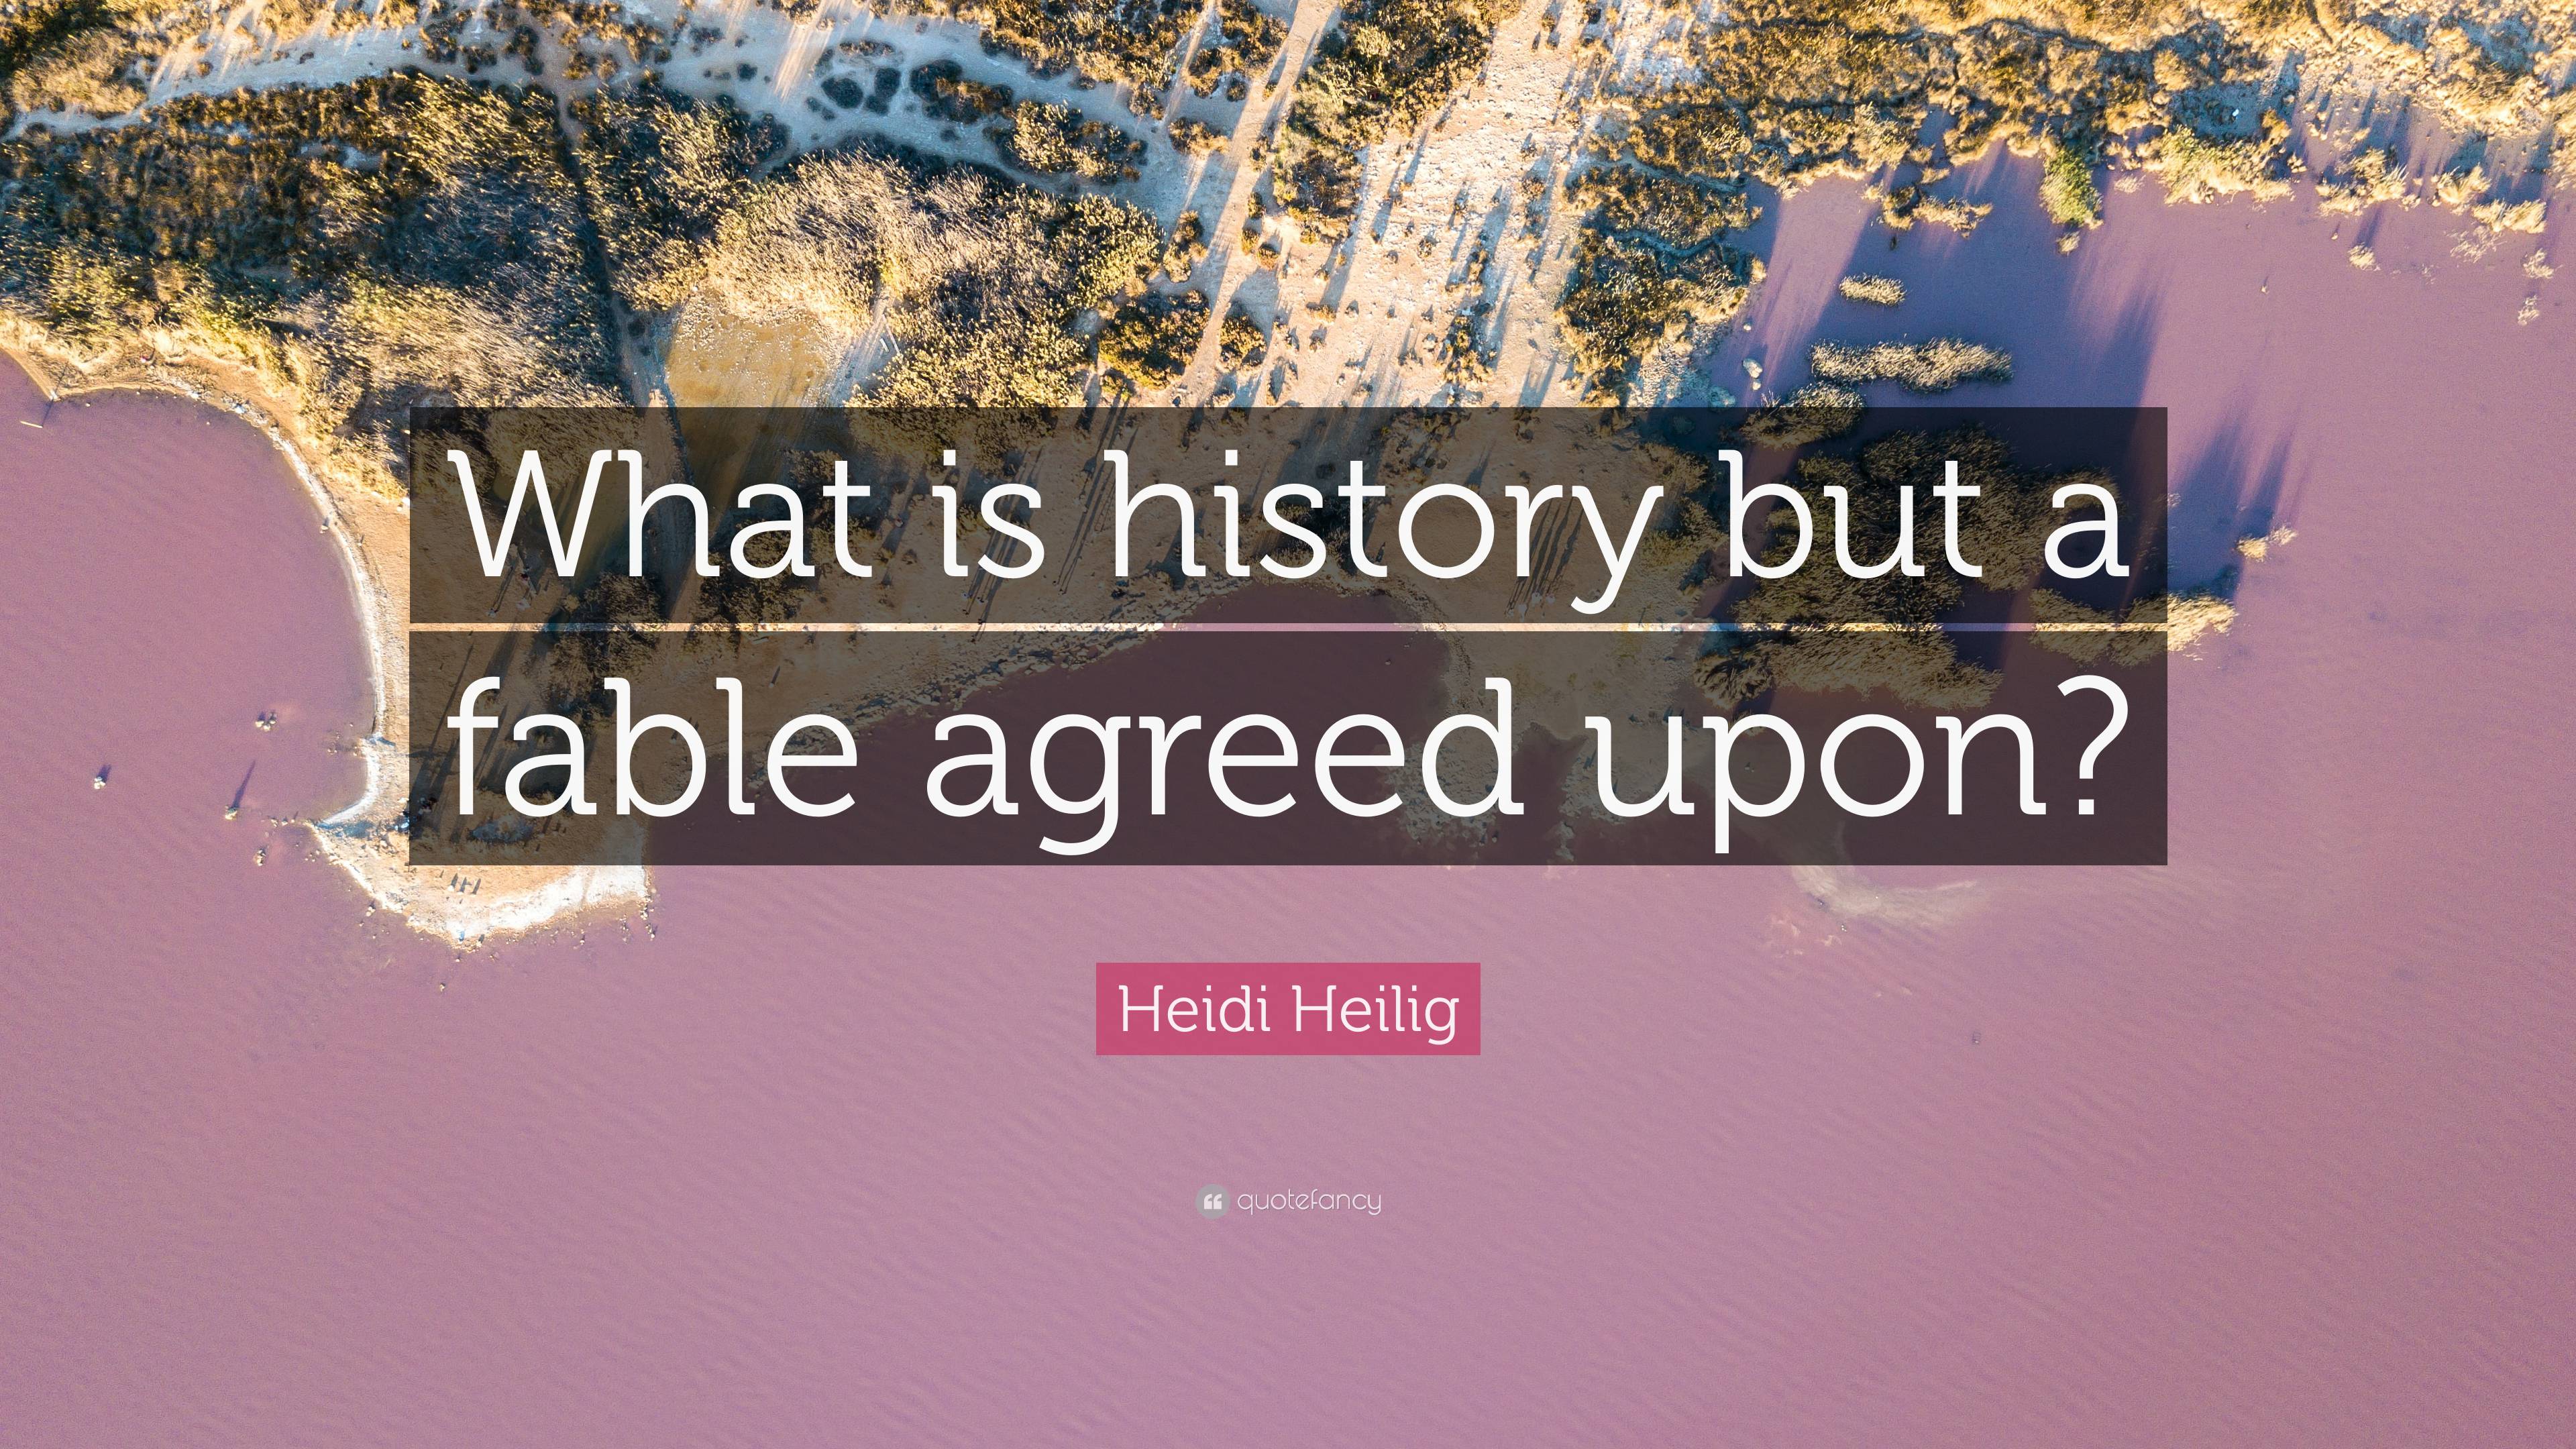 what is history but a fable agreed upon essay